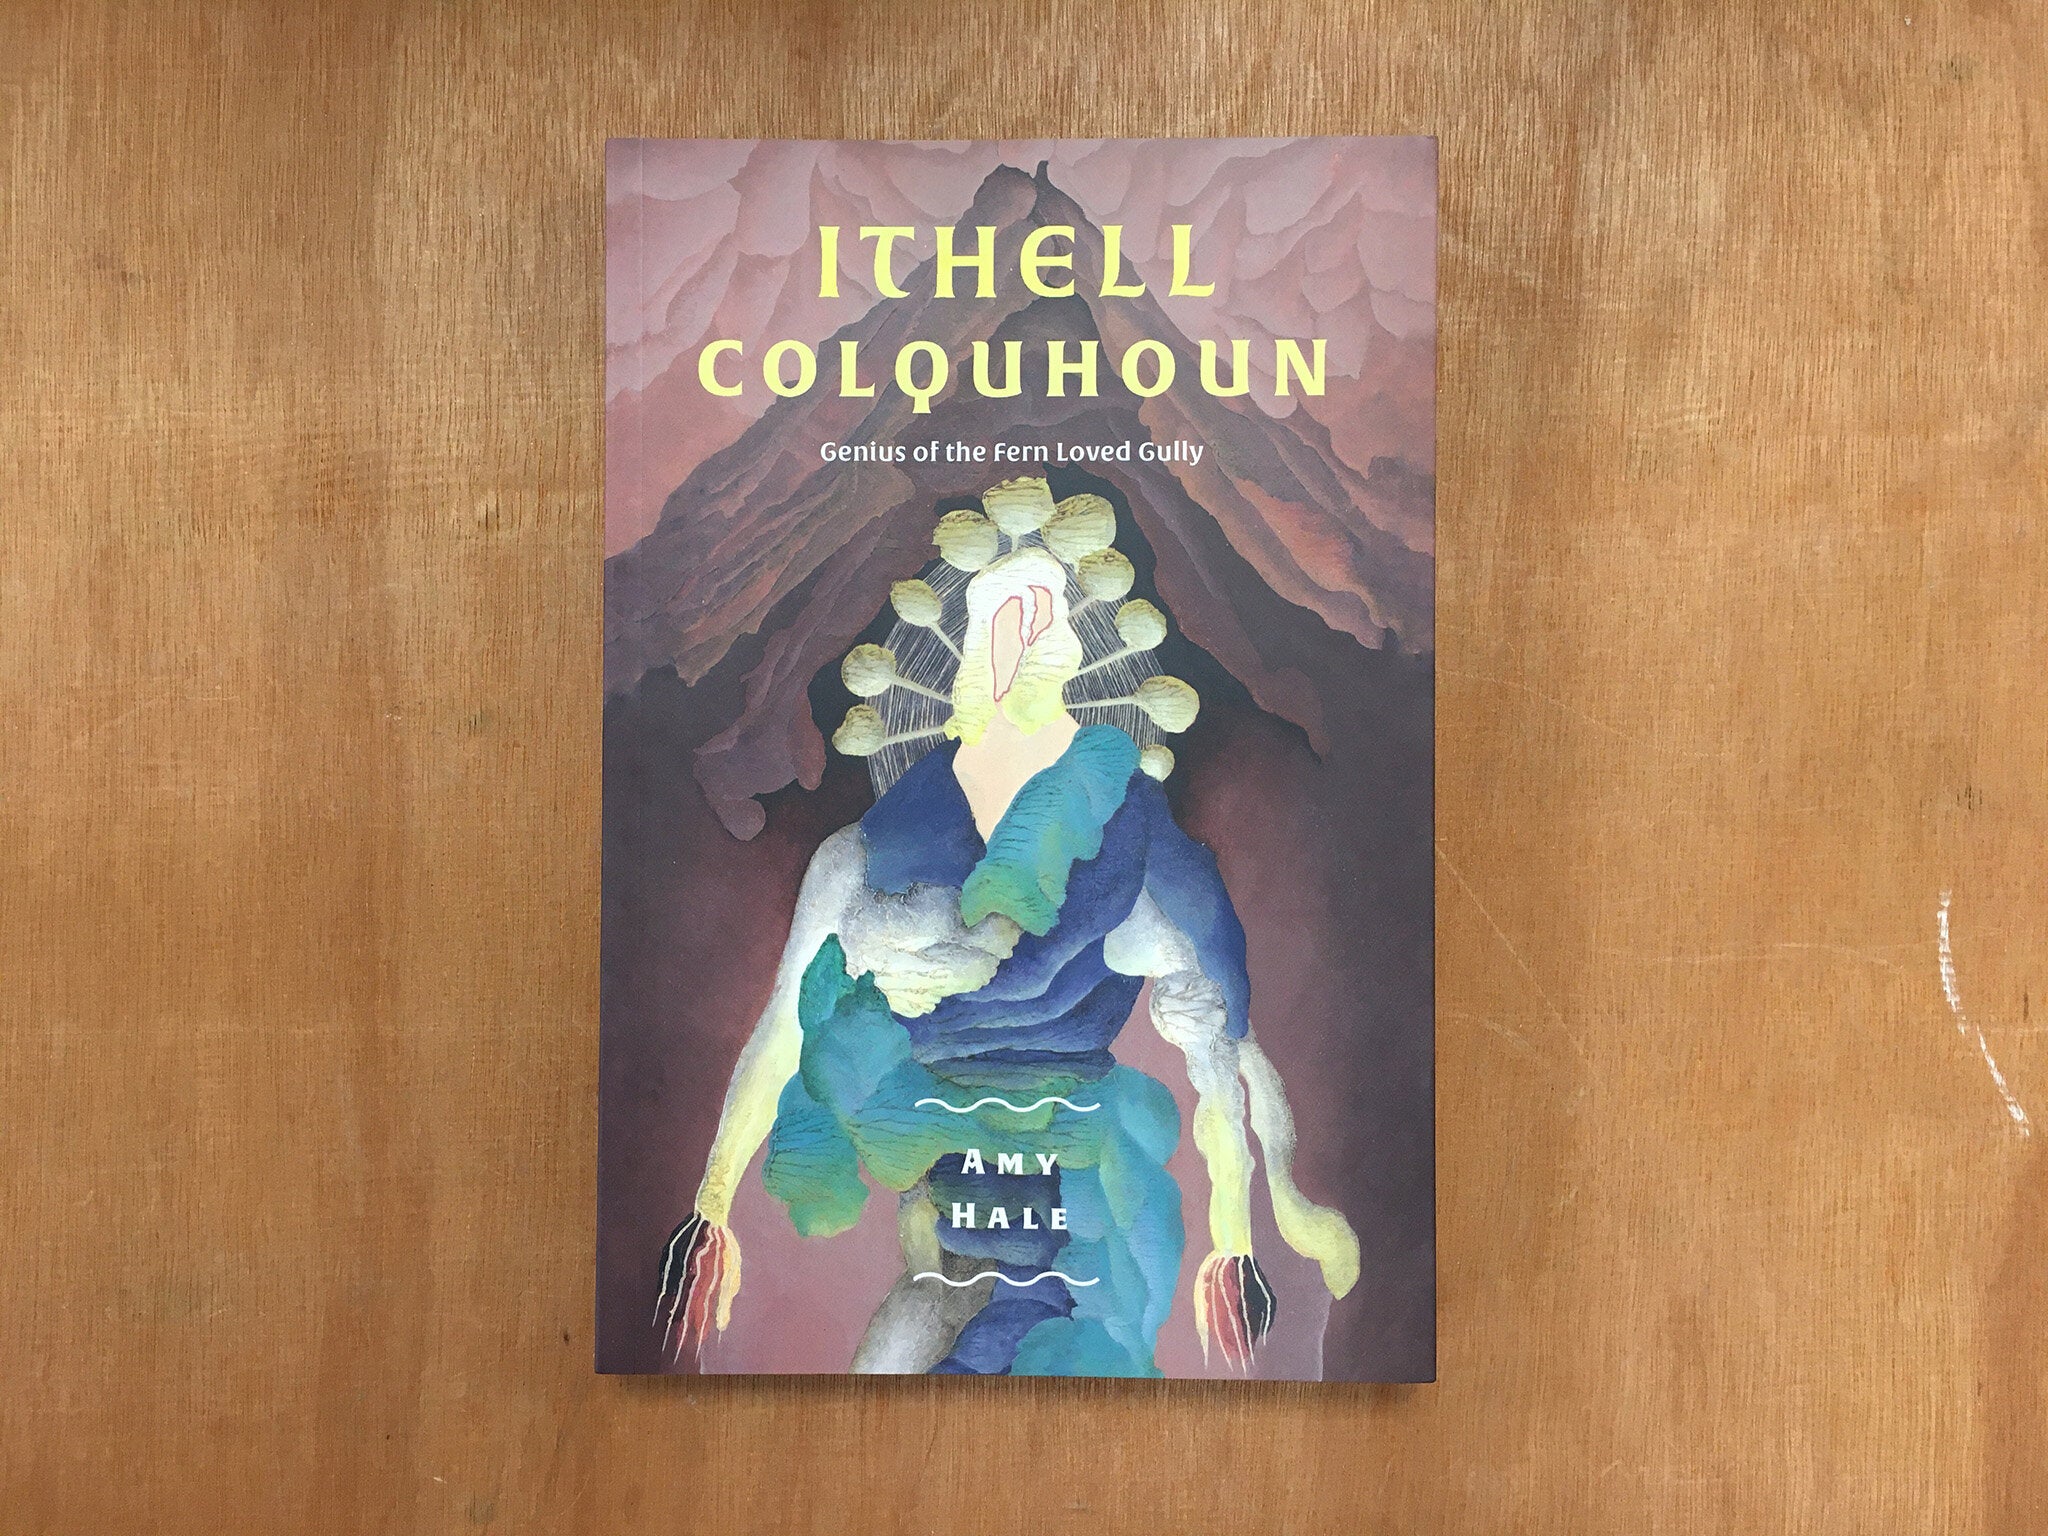 ITHELL COLQUHOUN: GENIUS OF THE FERN LOVED GULLEY by Amy Hale